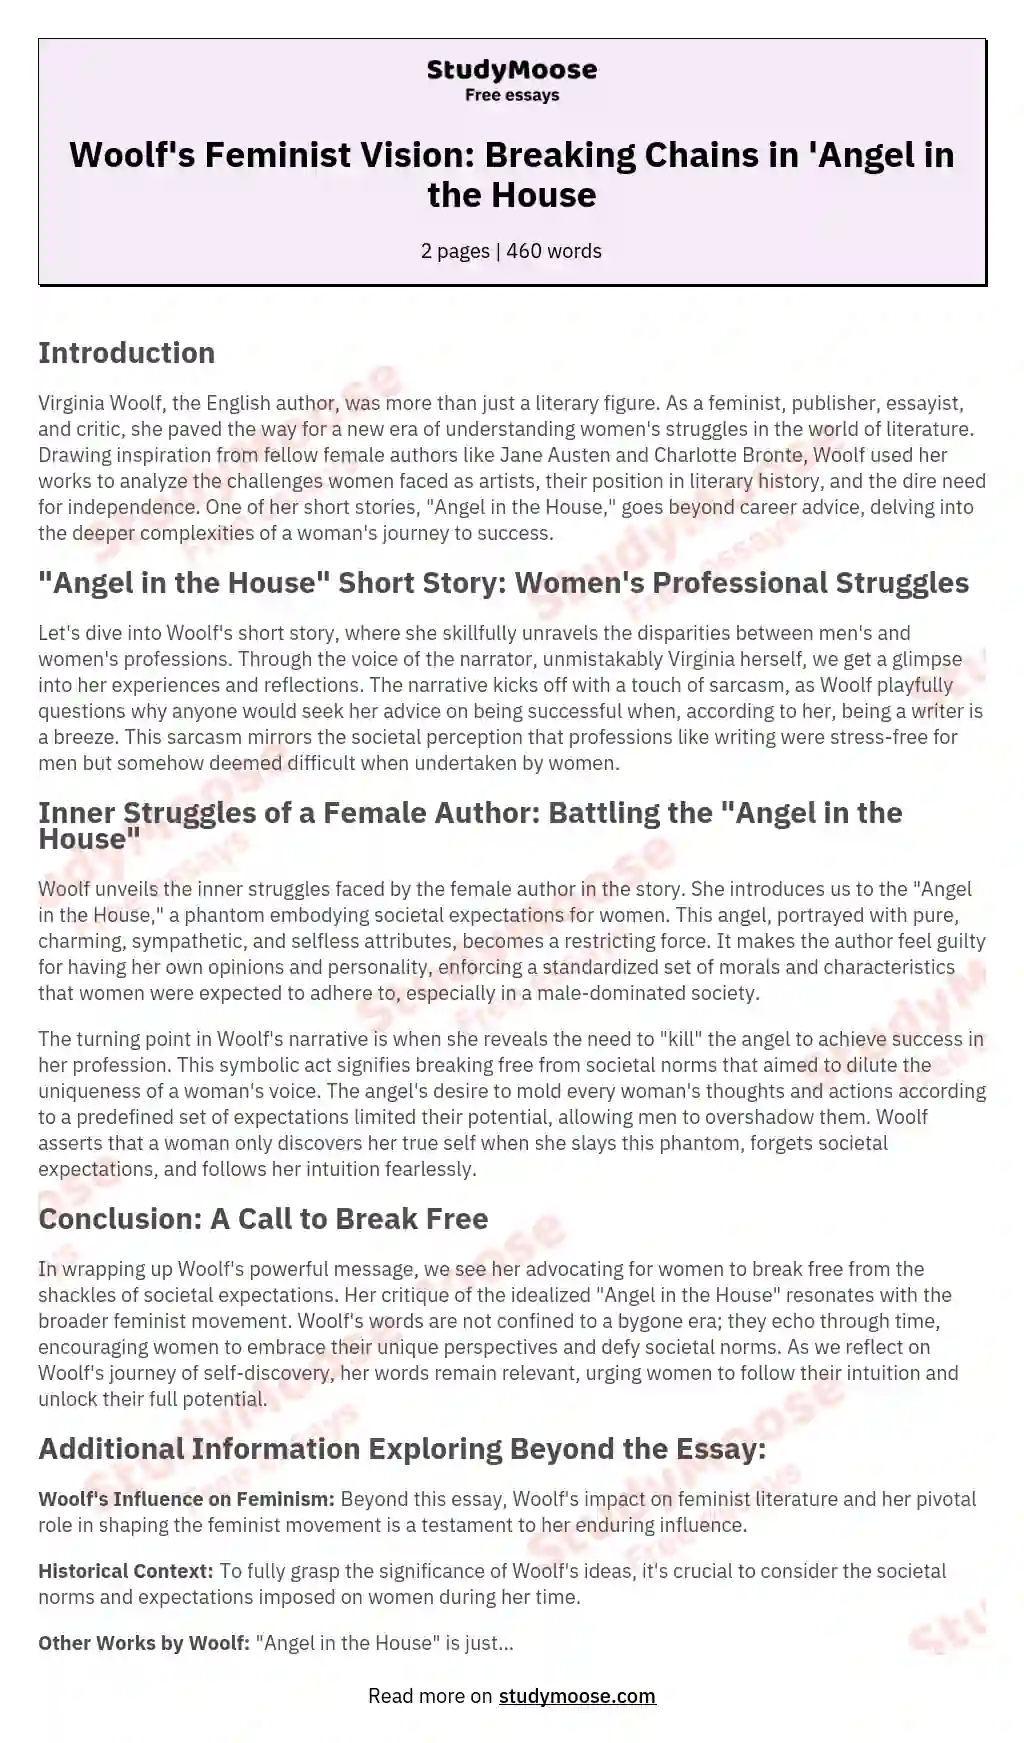 Woolf's Feminist Vision: Breaking Chains in 'Angel in the House essay